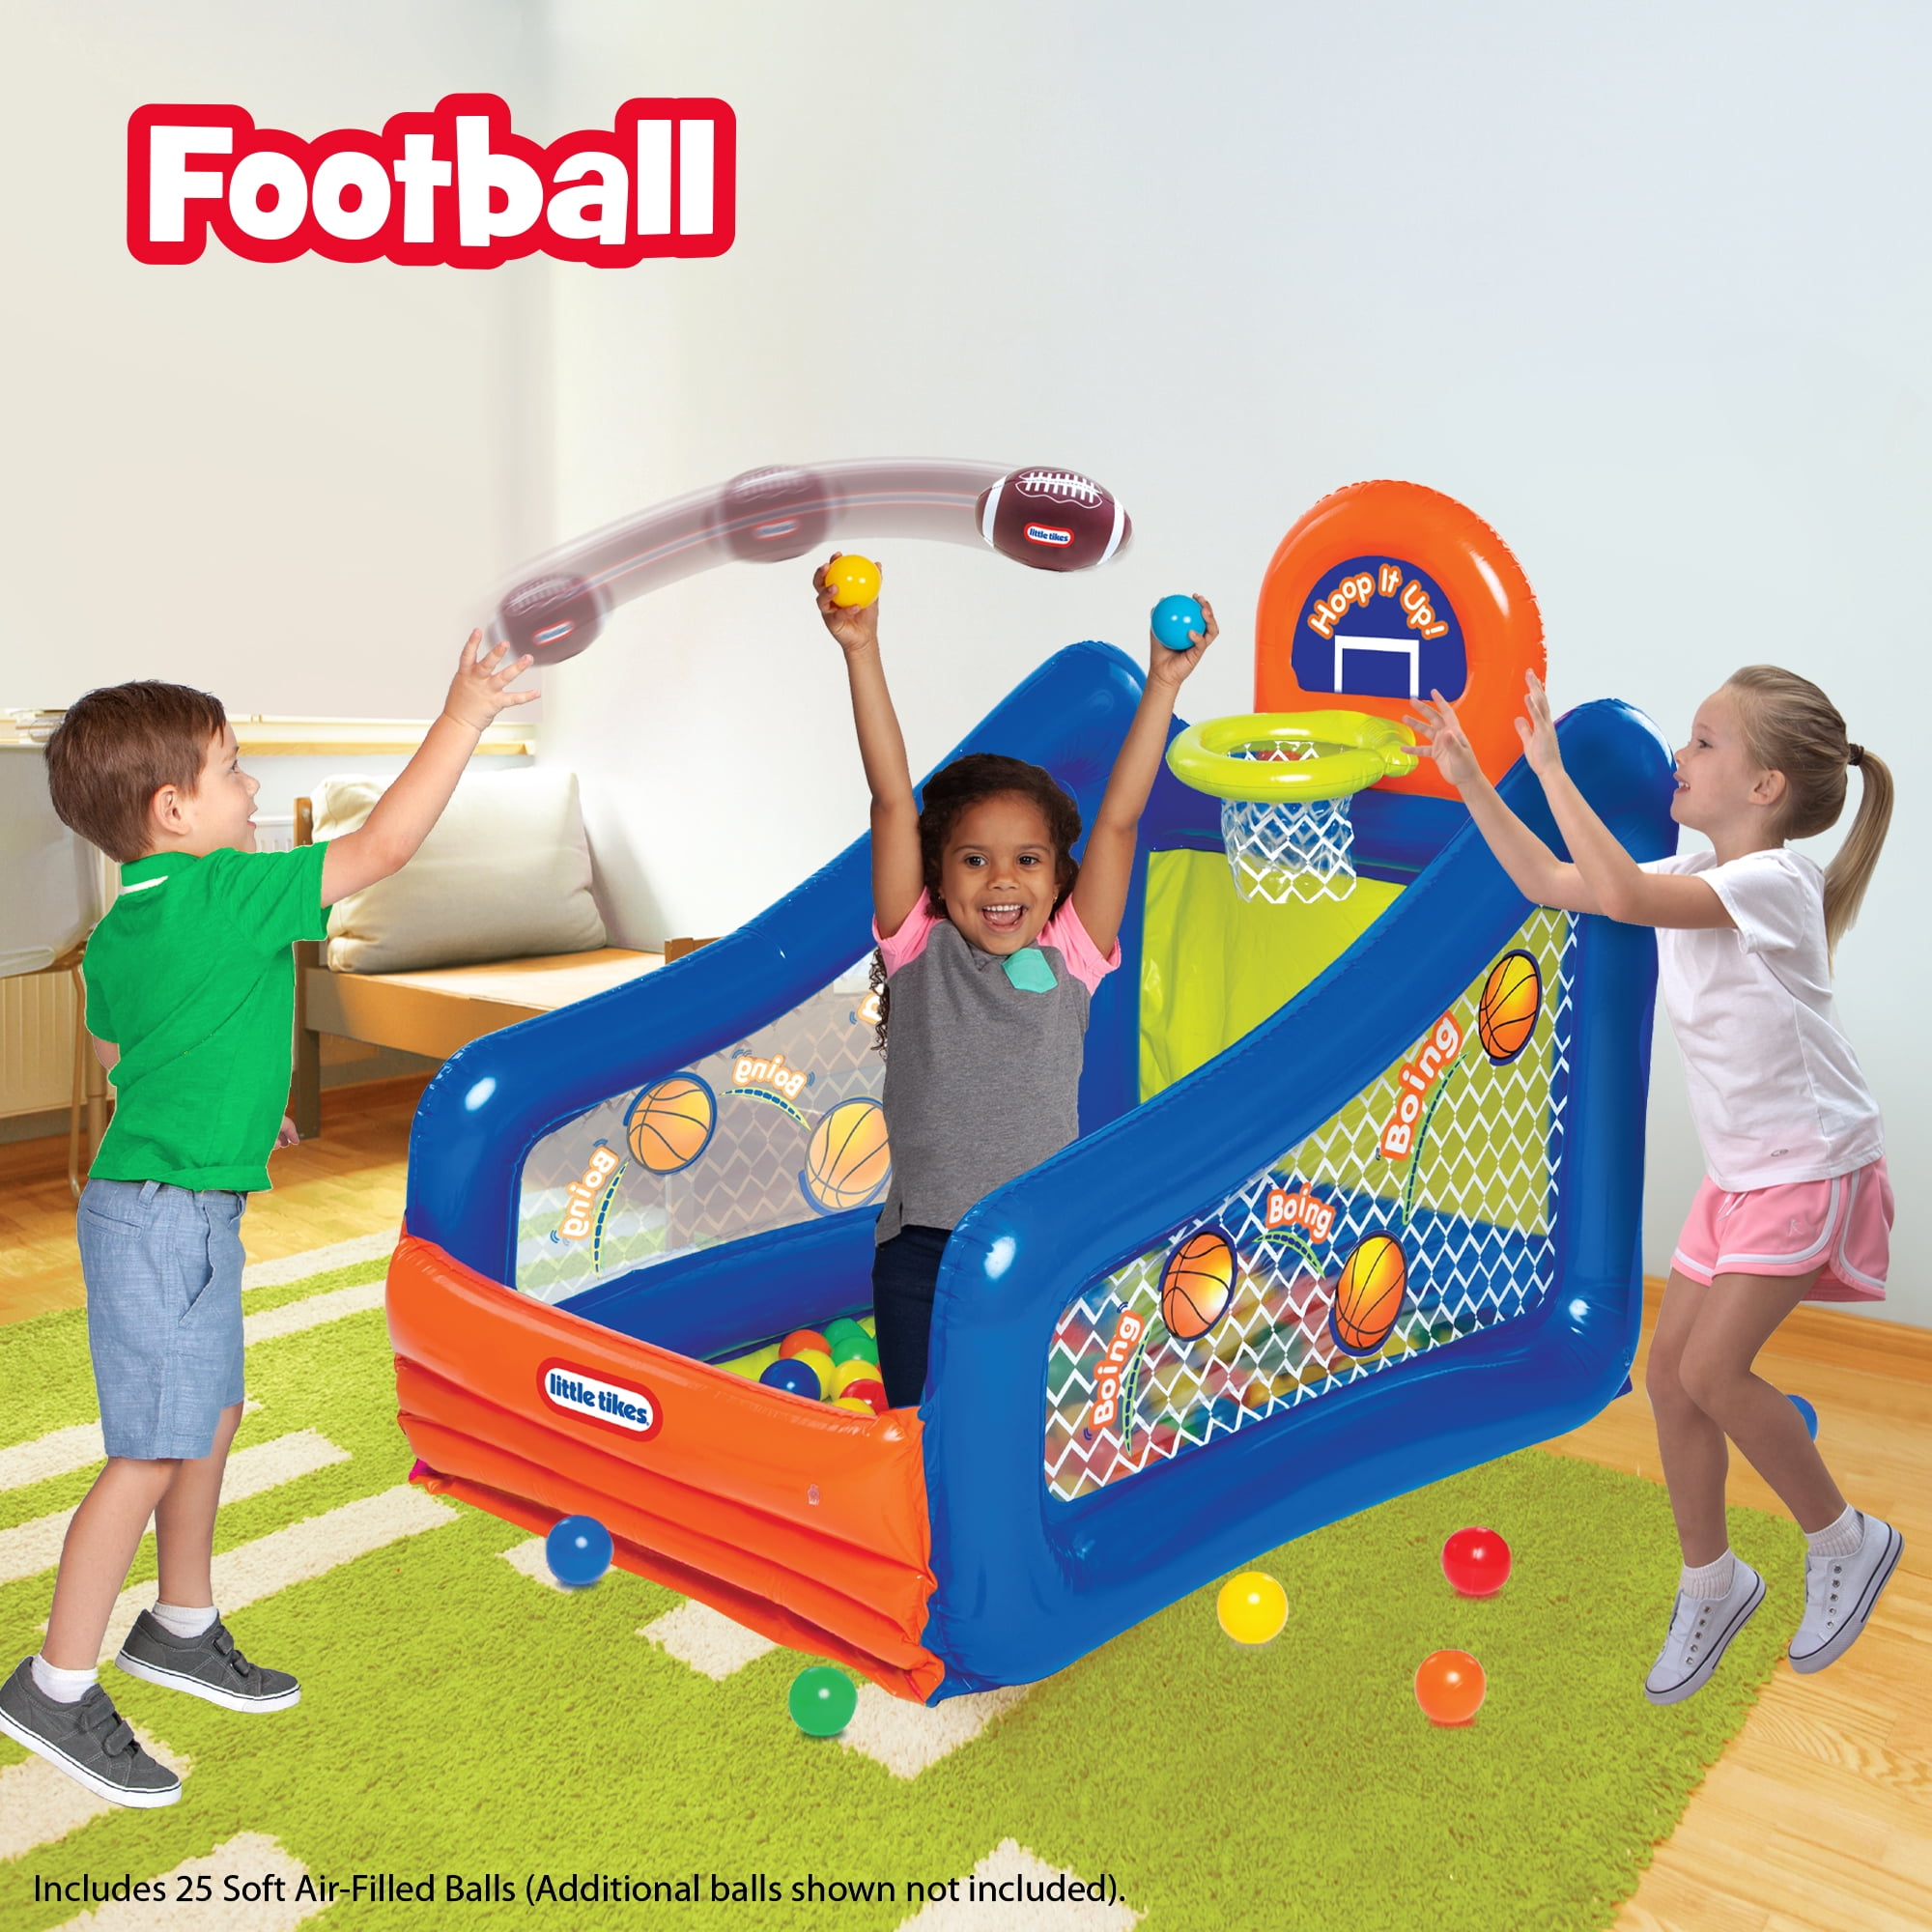 Little Tikes Brand Hoop It Up! Play Center Special Value Pack with 25 Balls, Toy Sports Ball Pit, Ages 3 Years Old and up - 2